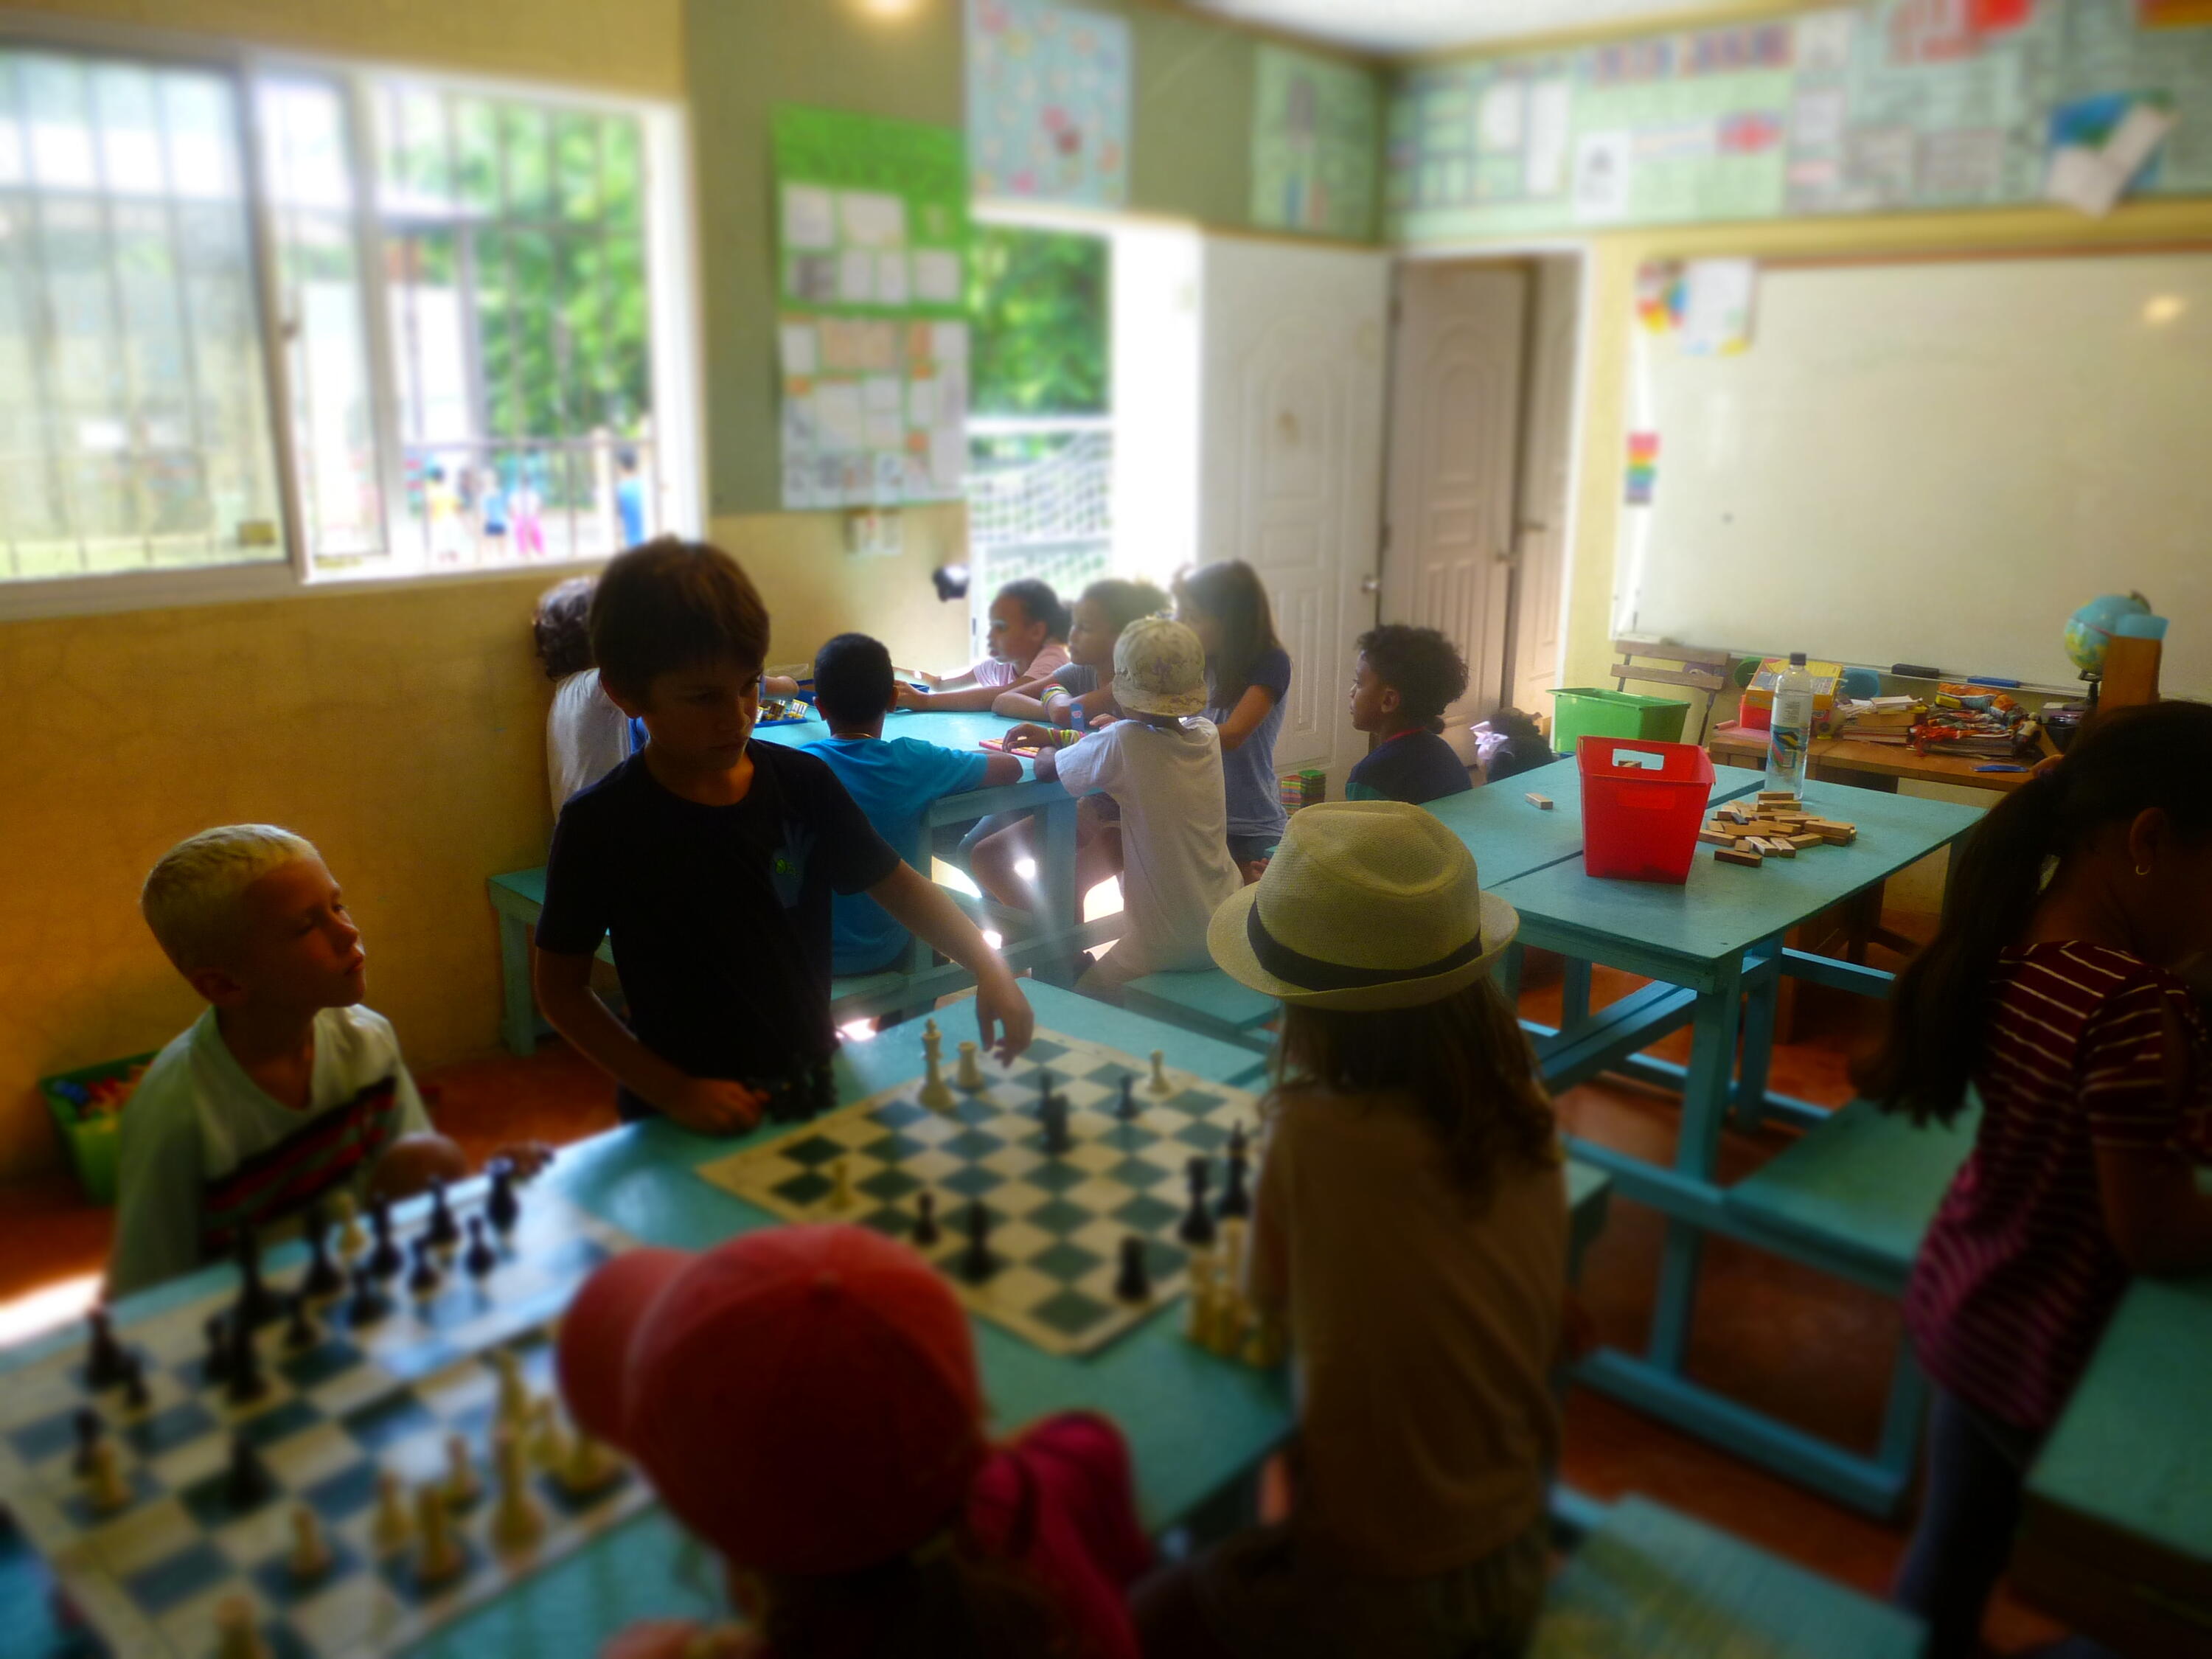 Children playing chess and other board games